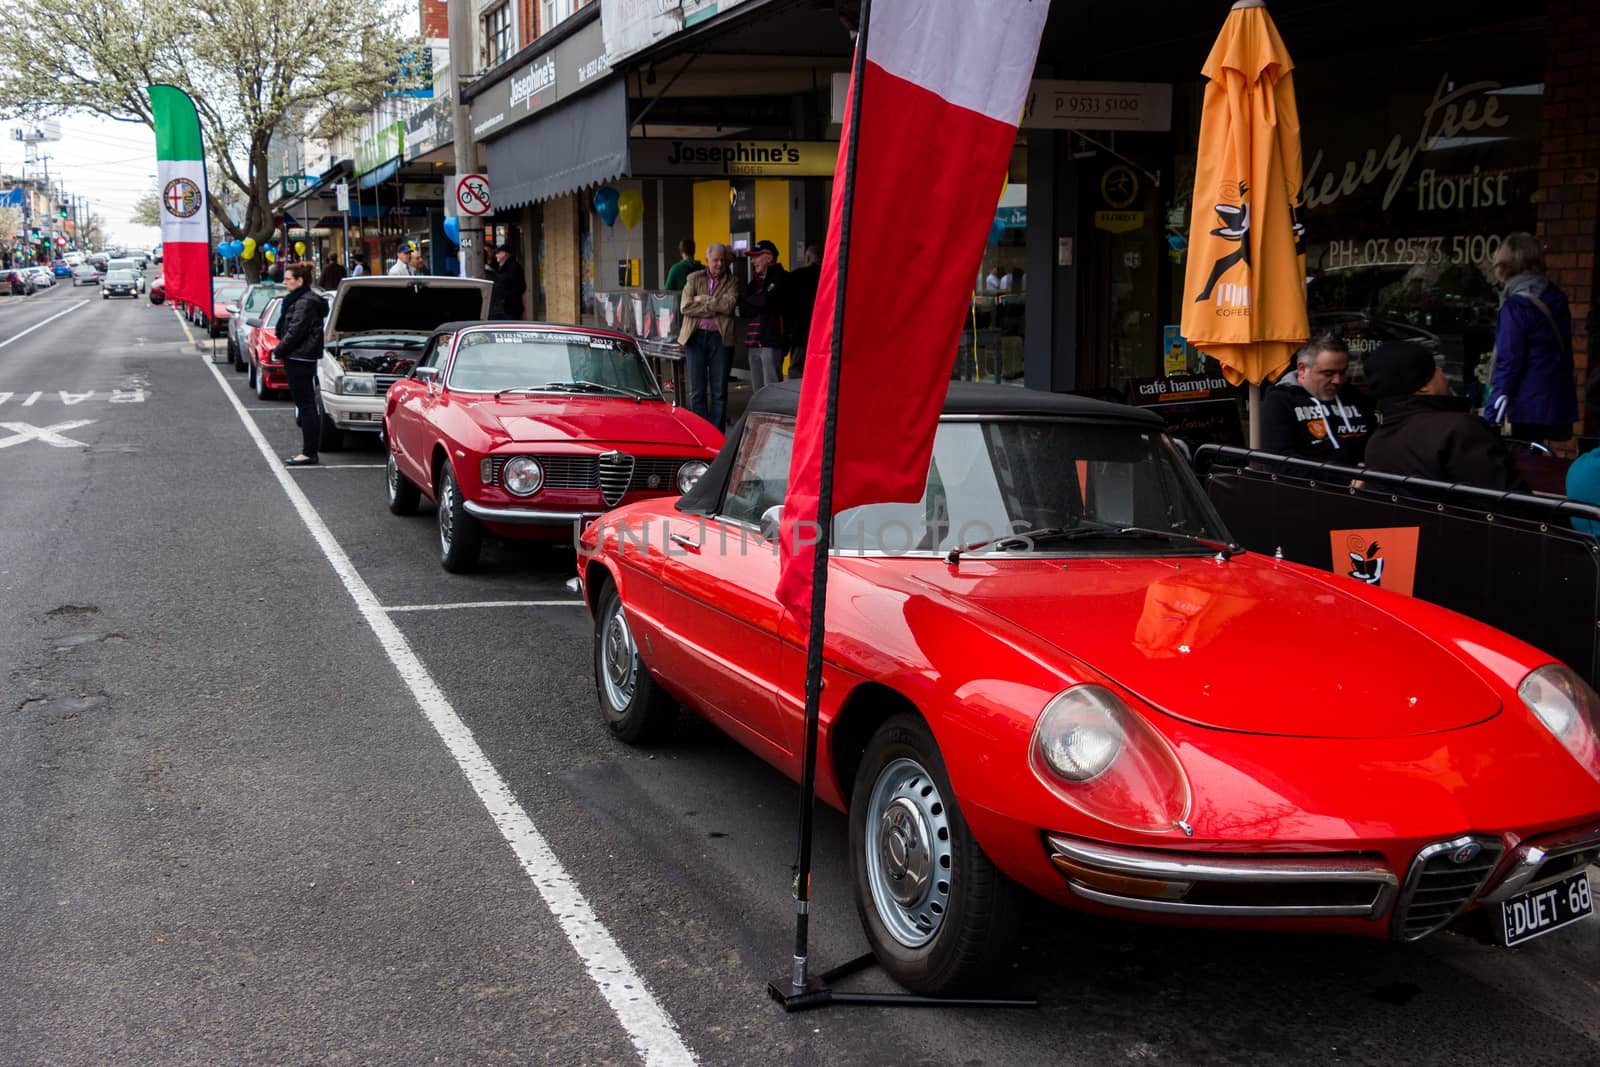 MELBOURNE / AUSTRALIA - SEPTEMBER 5 2015: Hampton Street Fathers Day Car Show - A selection of vintage and classic European cars from all over the world to celibrate Fathers Day in Hampton, Melbourne.